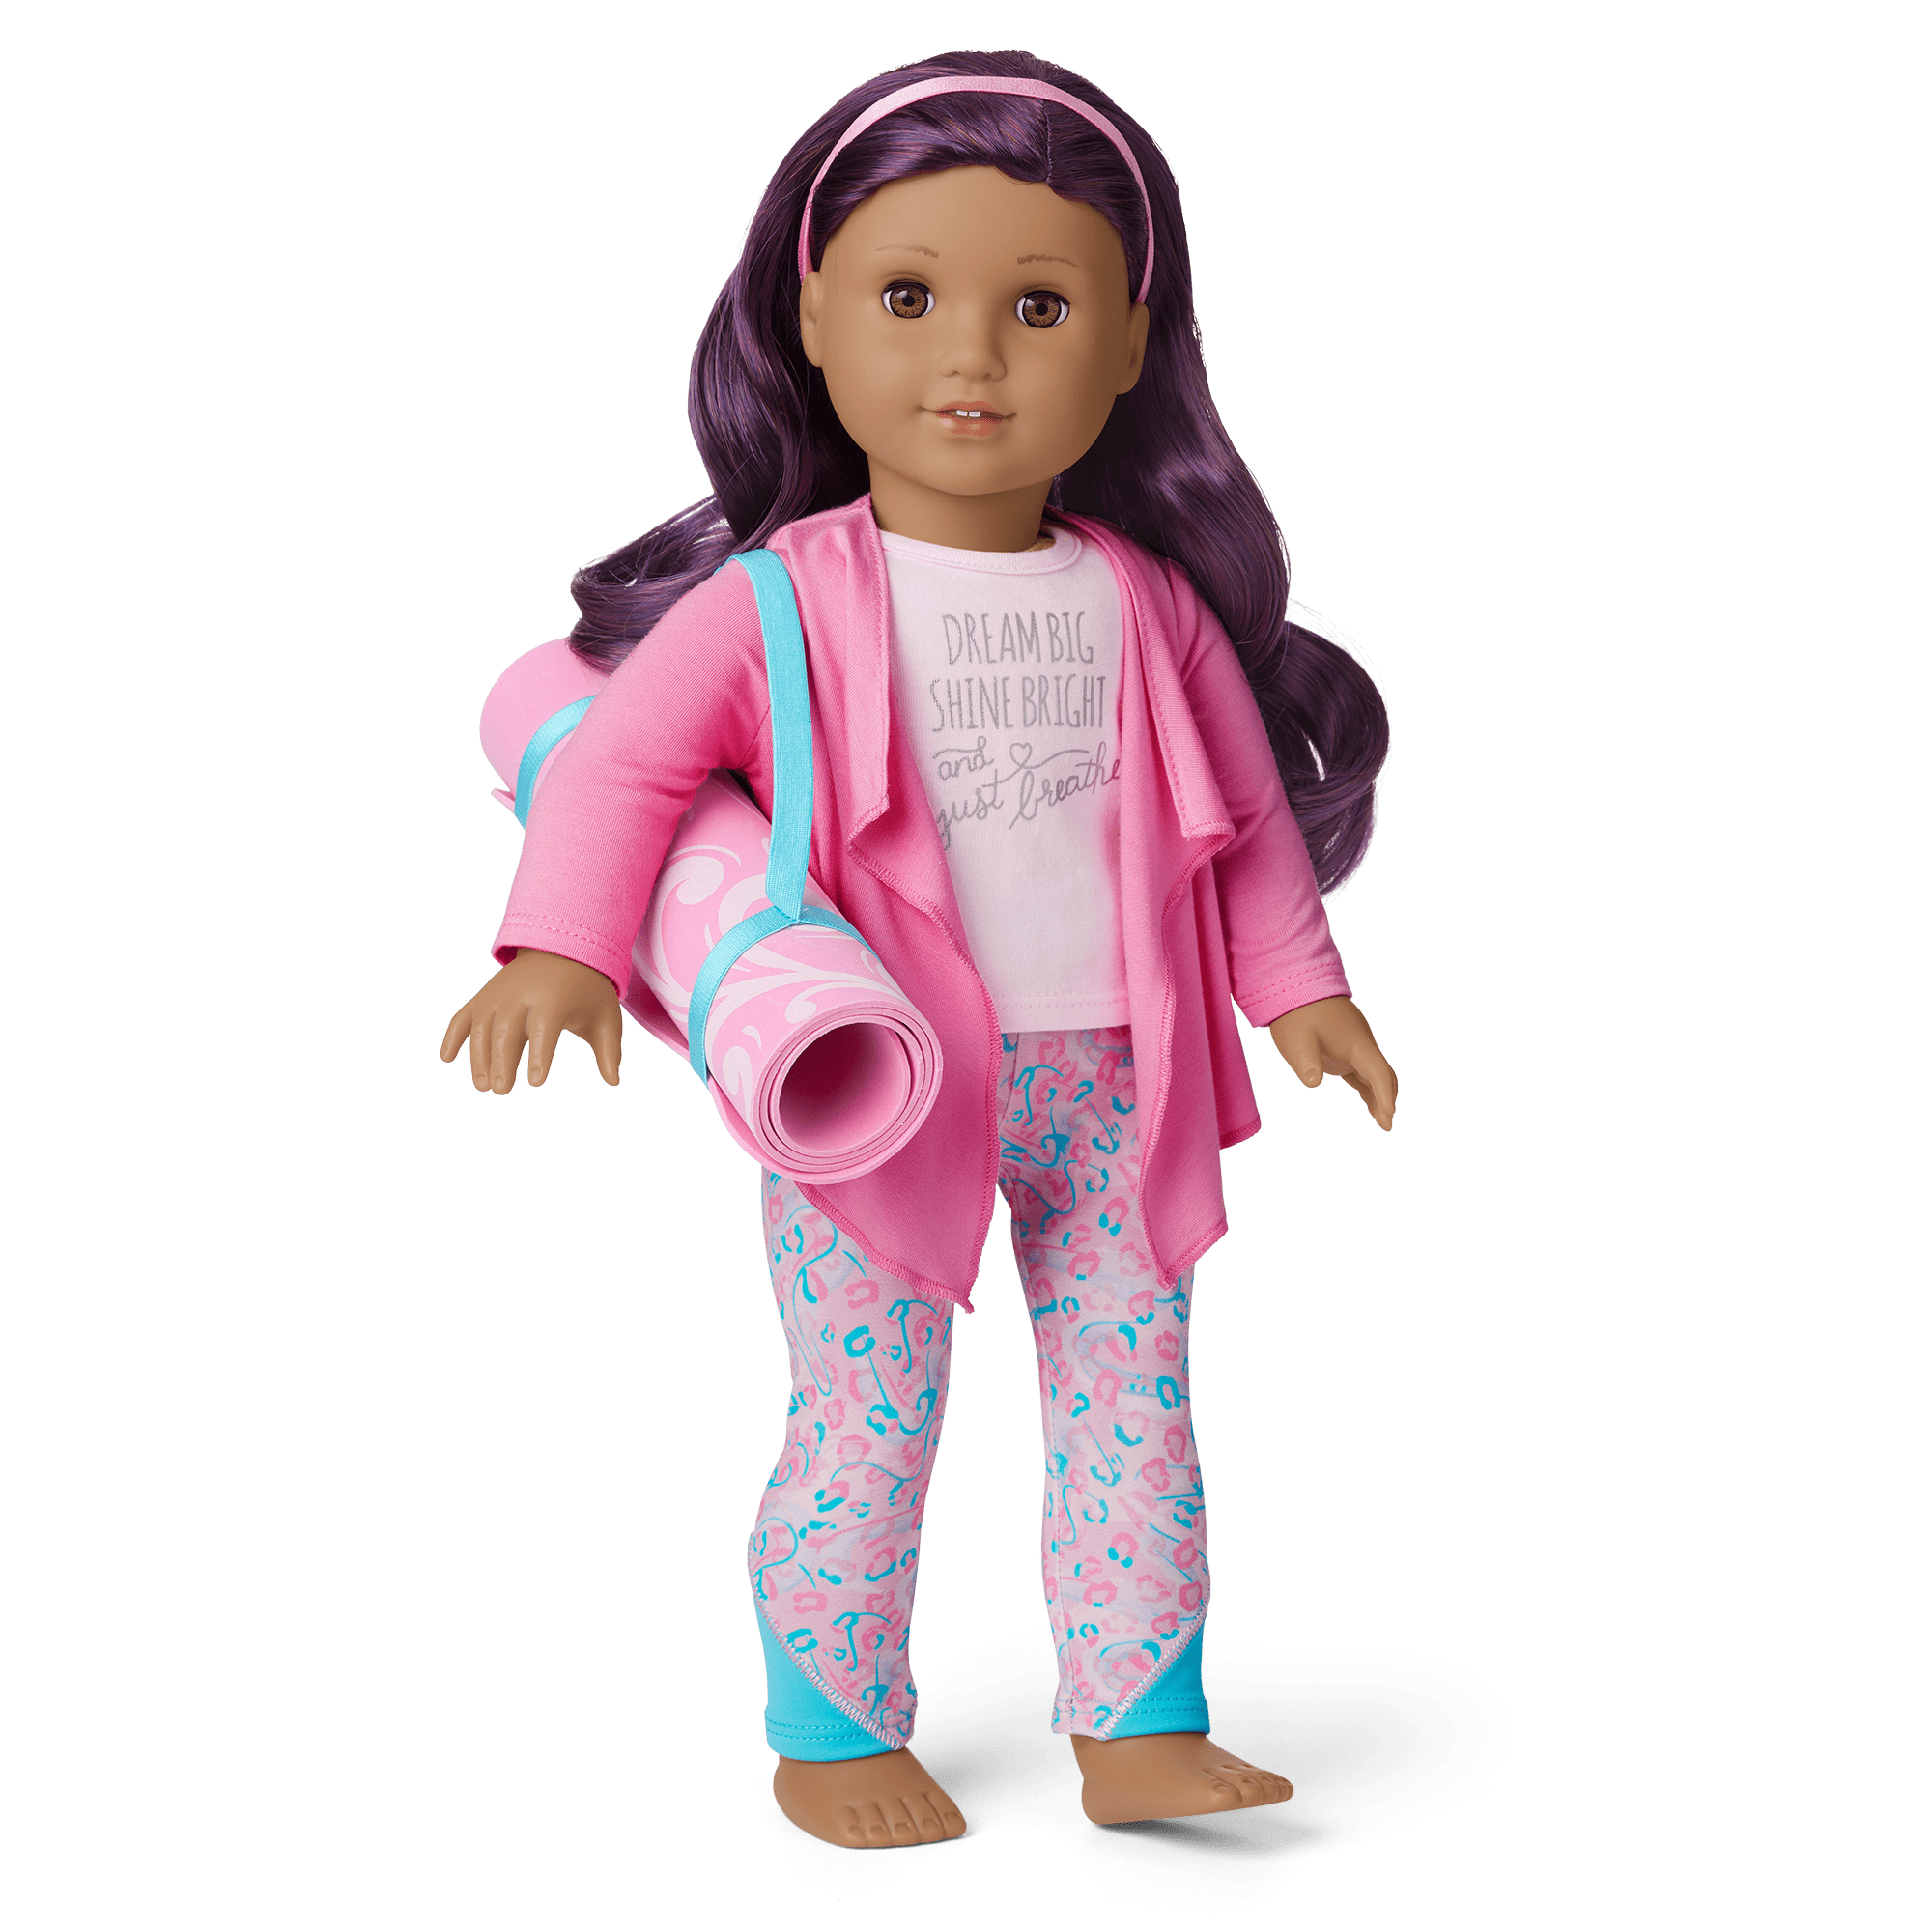 Dress Along Dolly 5 pc Yoga Outfit- 18 Doll Clothes & Accessories  Compatible w American Girl Doll- Pilates Fitness Set Includes Exercise Mat  w Carrying Bag, Workout Pants, Gym Shirt & Cropped Sweater : Toys & Games 